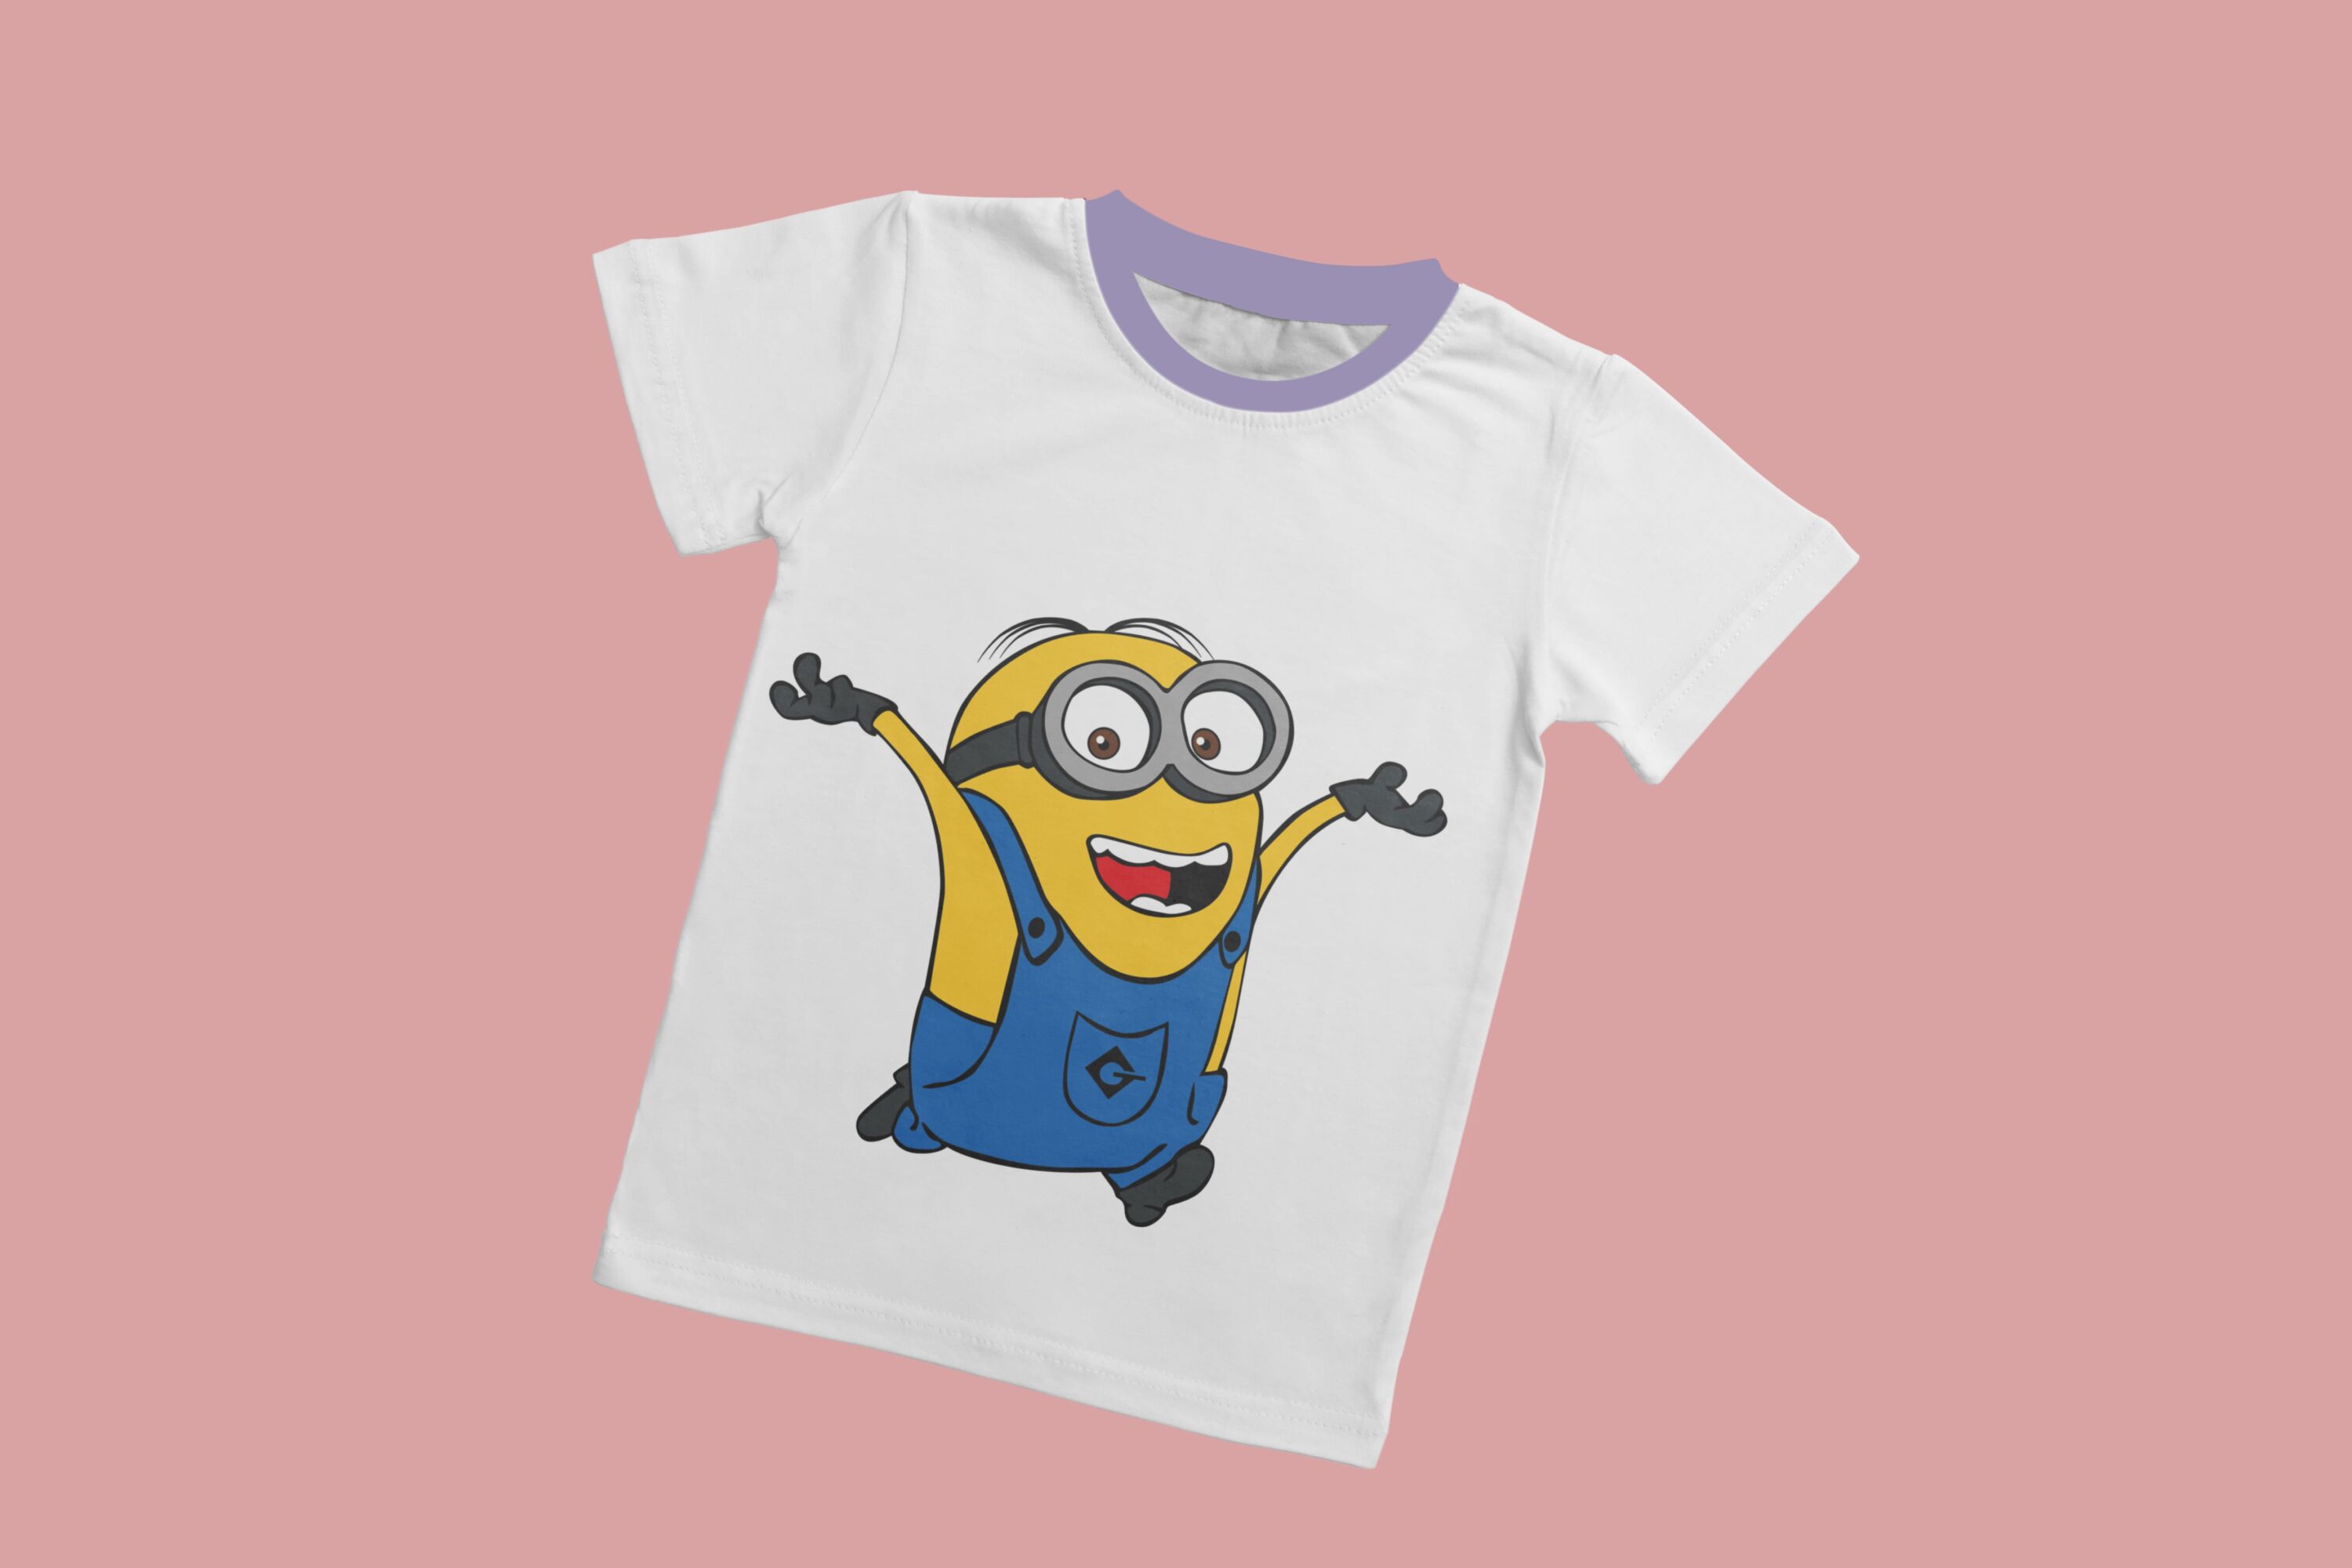 A white T-shirt with a lavender collar and a happy minion.